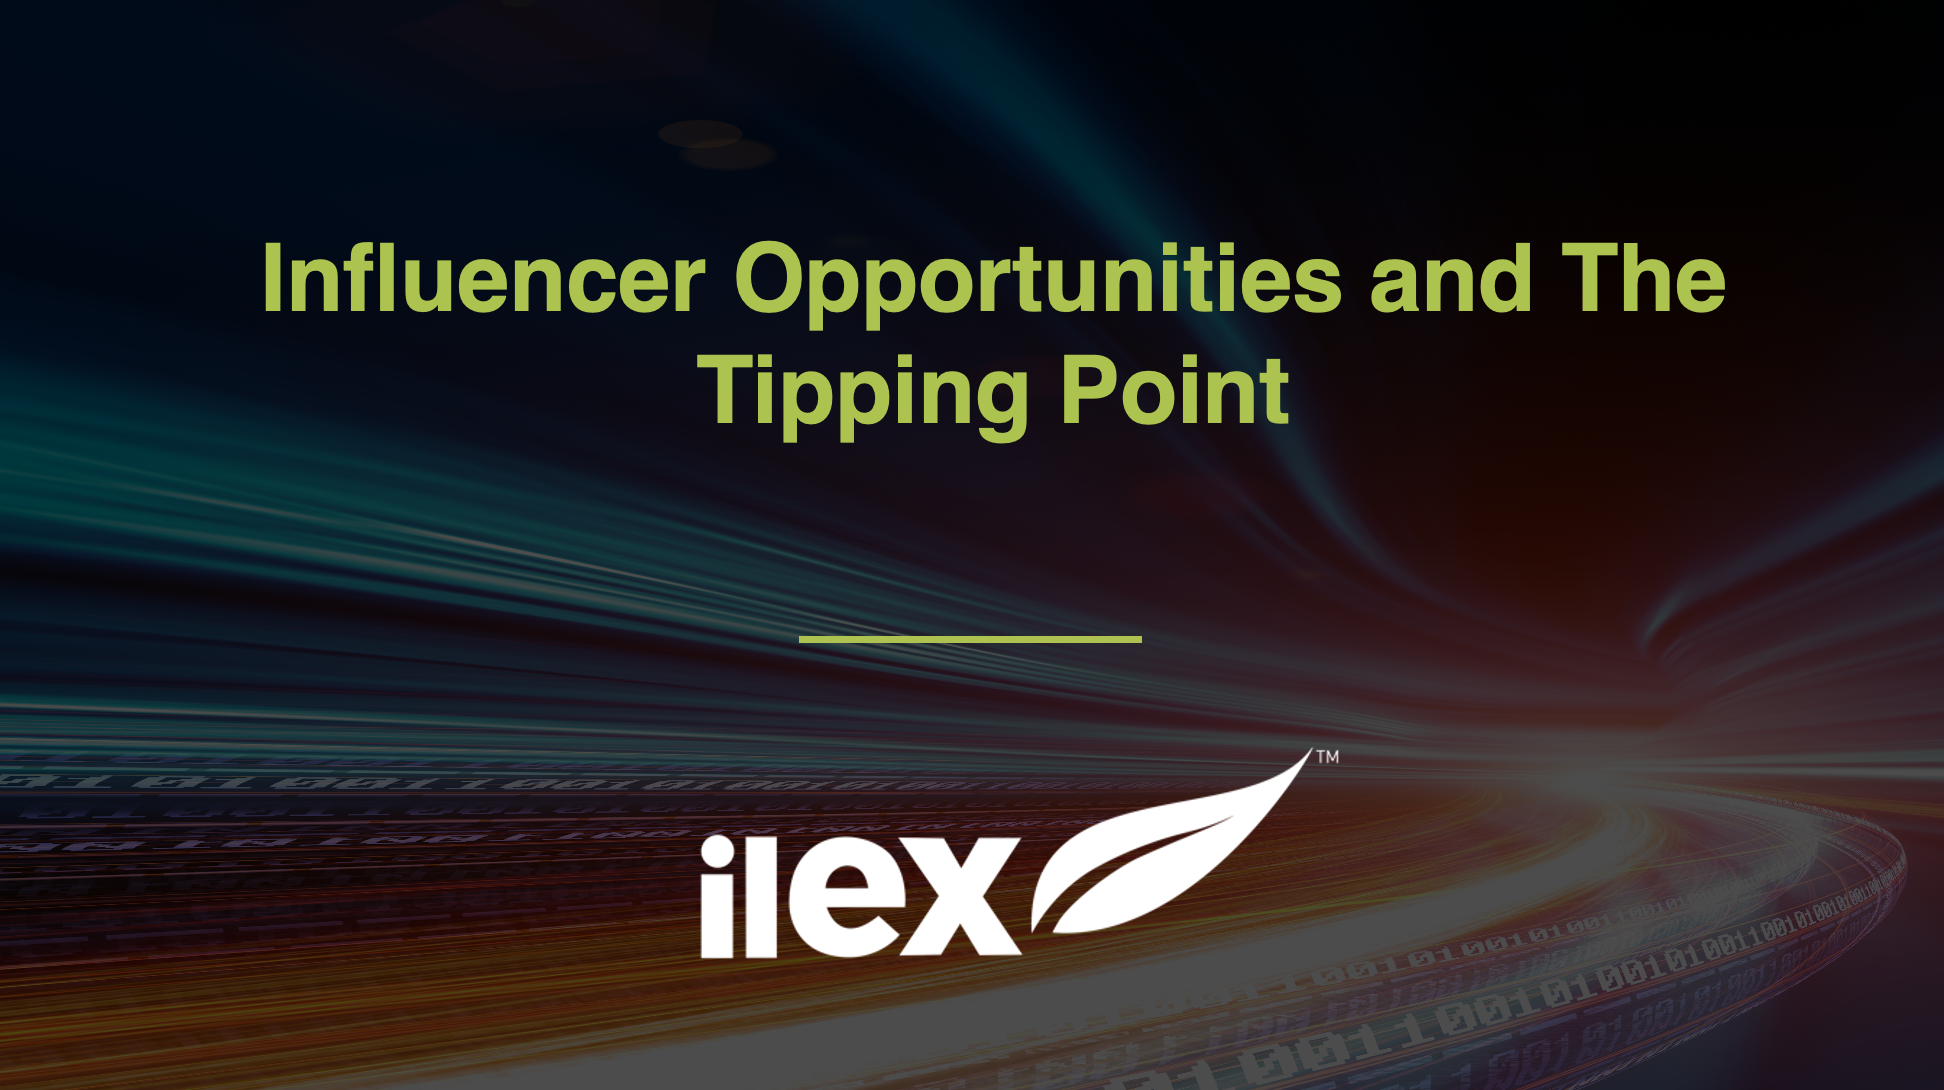 Influencer Opportunities and The Tipping Point